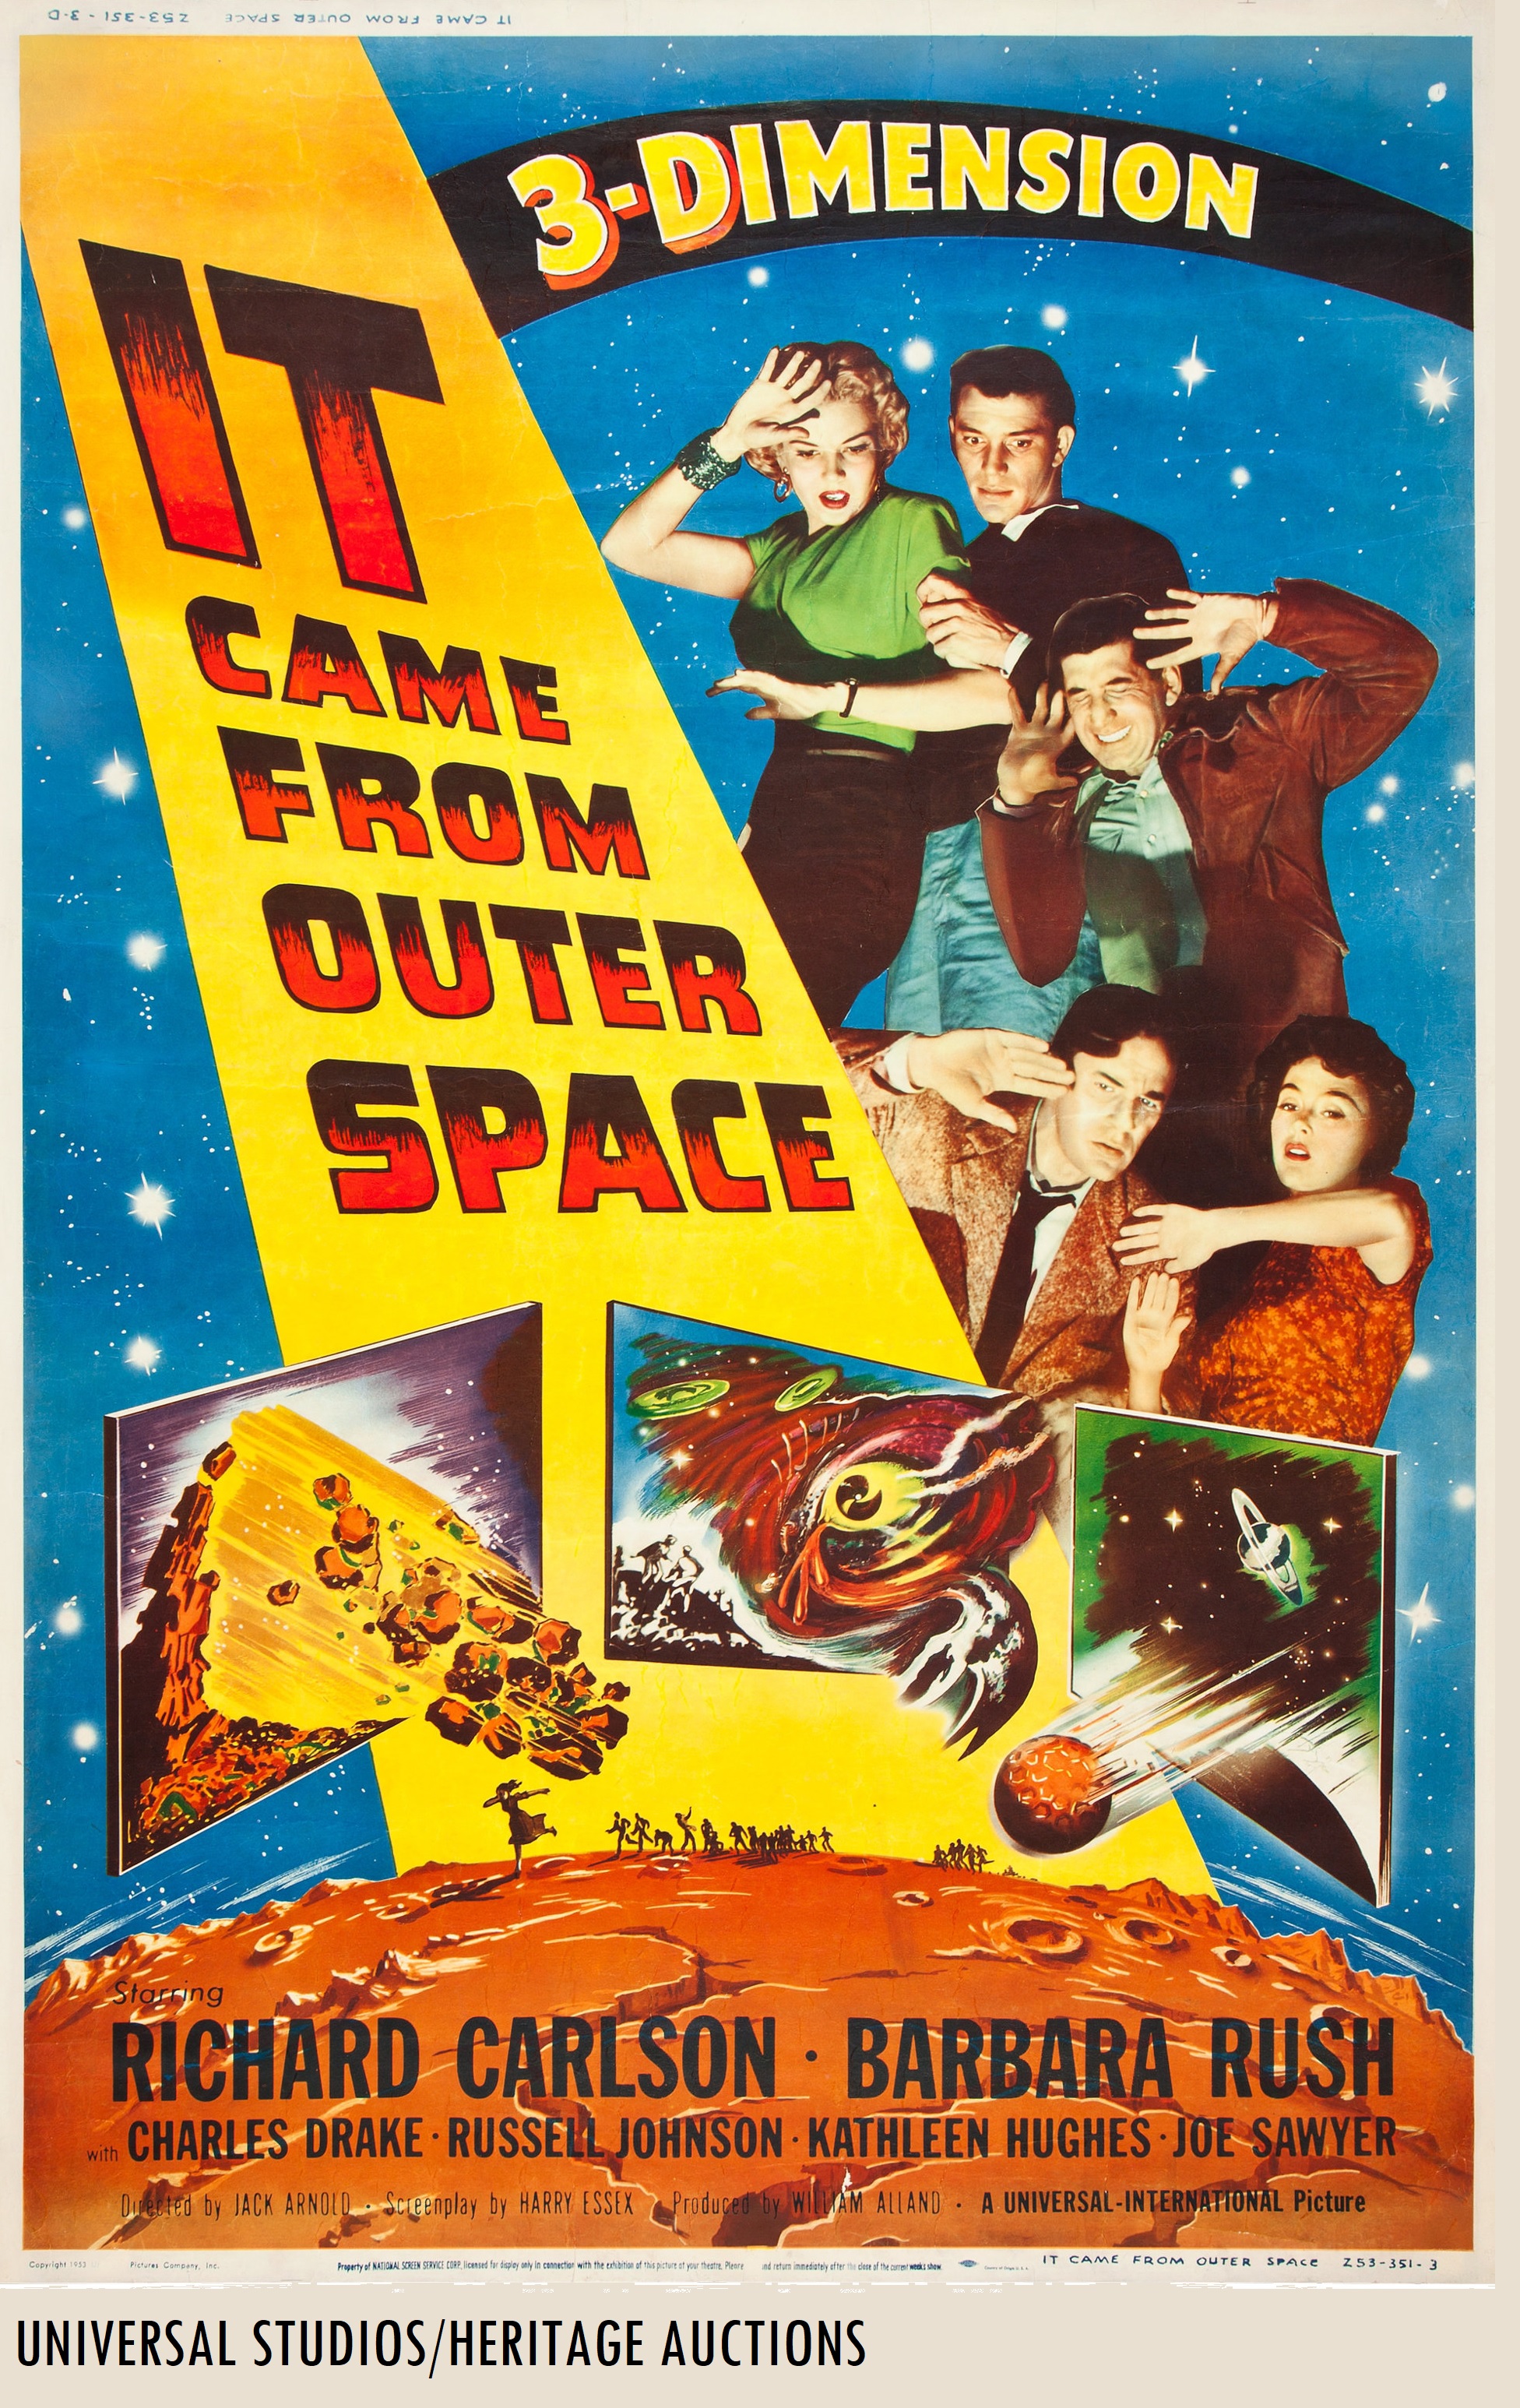 Original_1953_Universal_Studios__Theatrical_Poster_Art_t_It_Came_From_Outer_Space